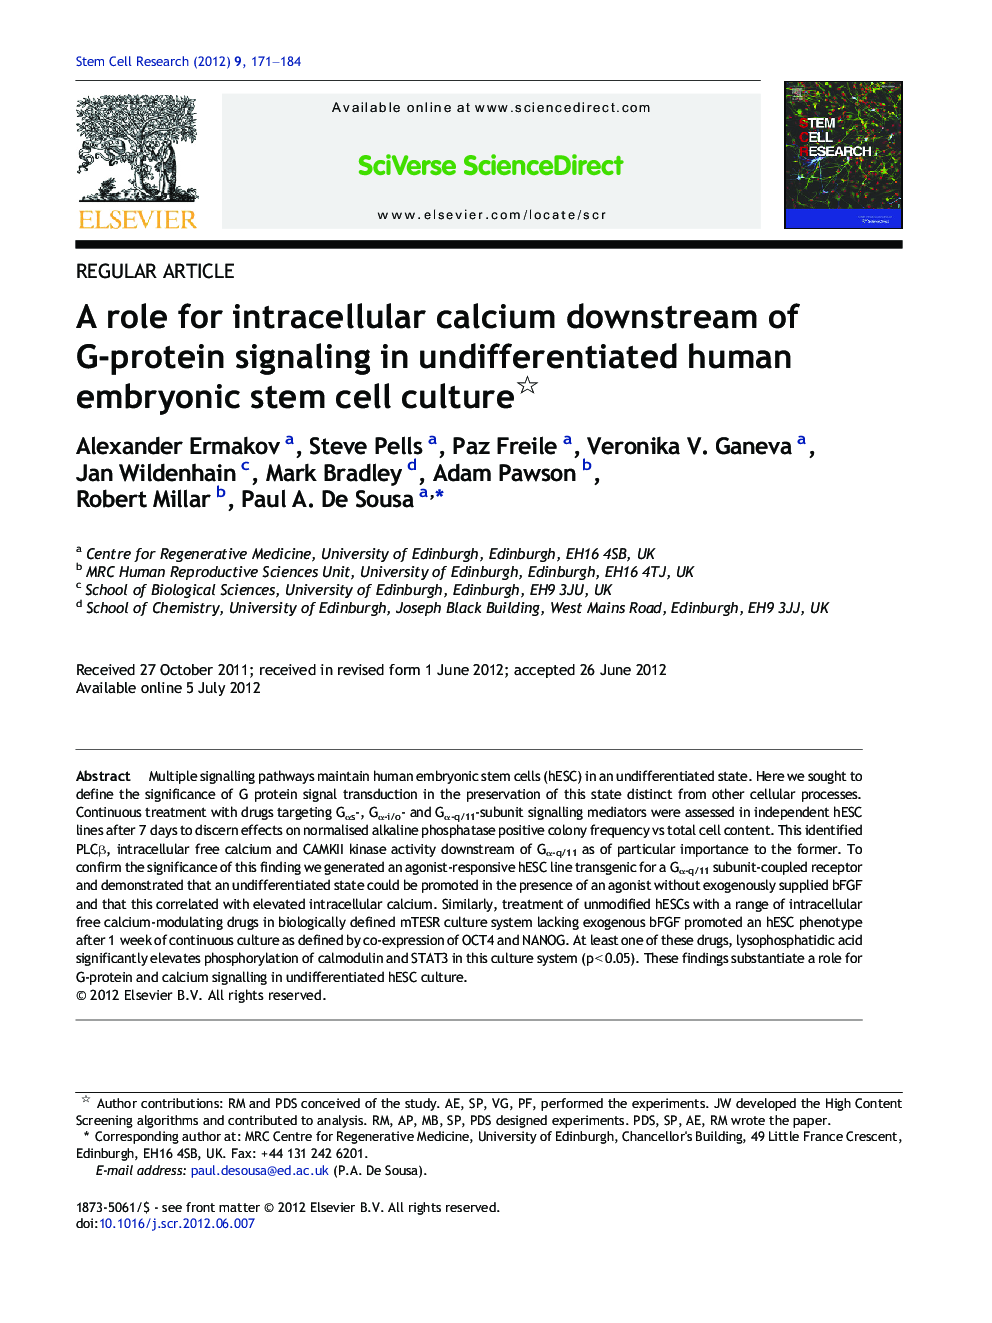 A role for intracellular calcium downstream of G-protein signaling in undifferentiated human embryonic stem cell culture